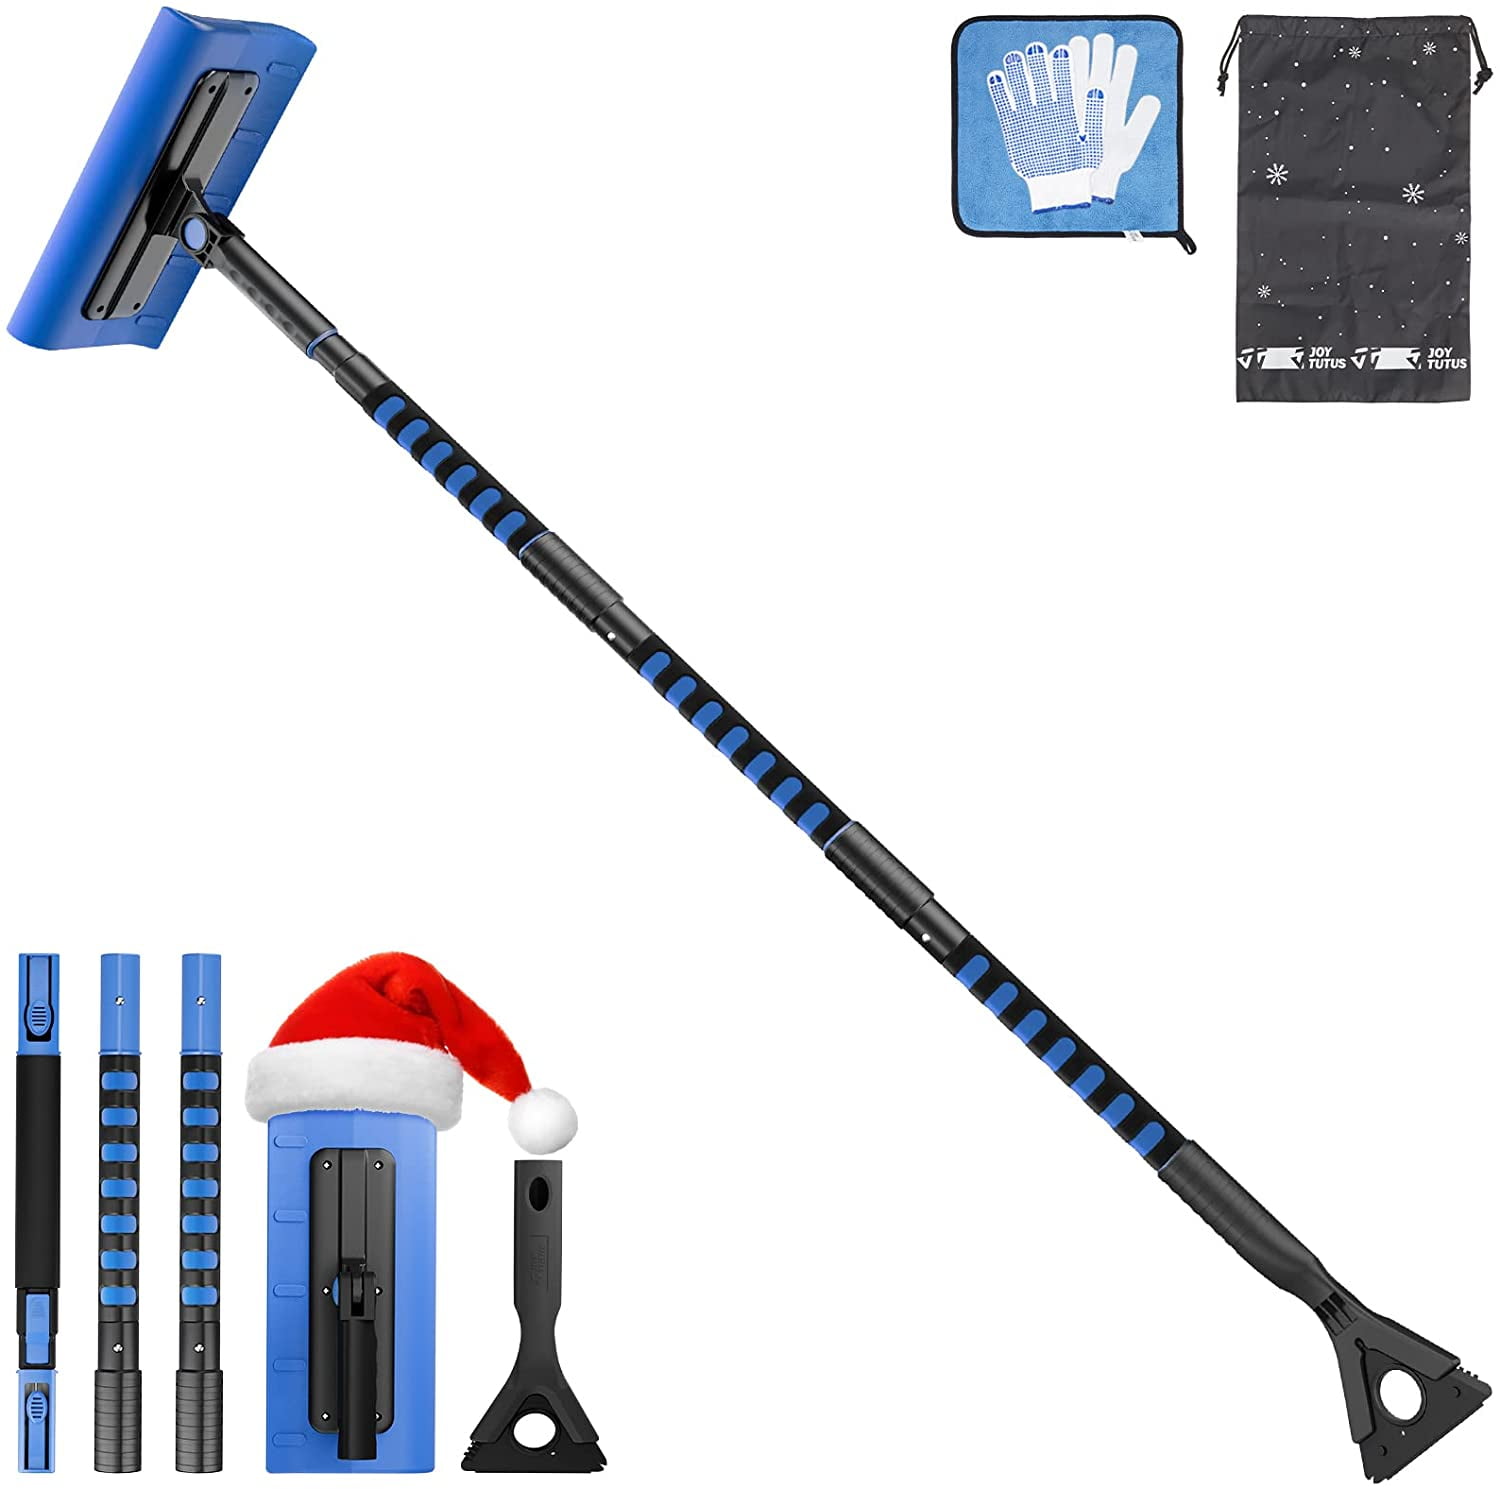 Snow Brush for Car Blue Ice Scraper for Car Windshield Extendable Snow Brush Remover with Foam Grip for Car Auto SUV Truck Windows 